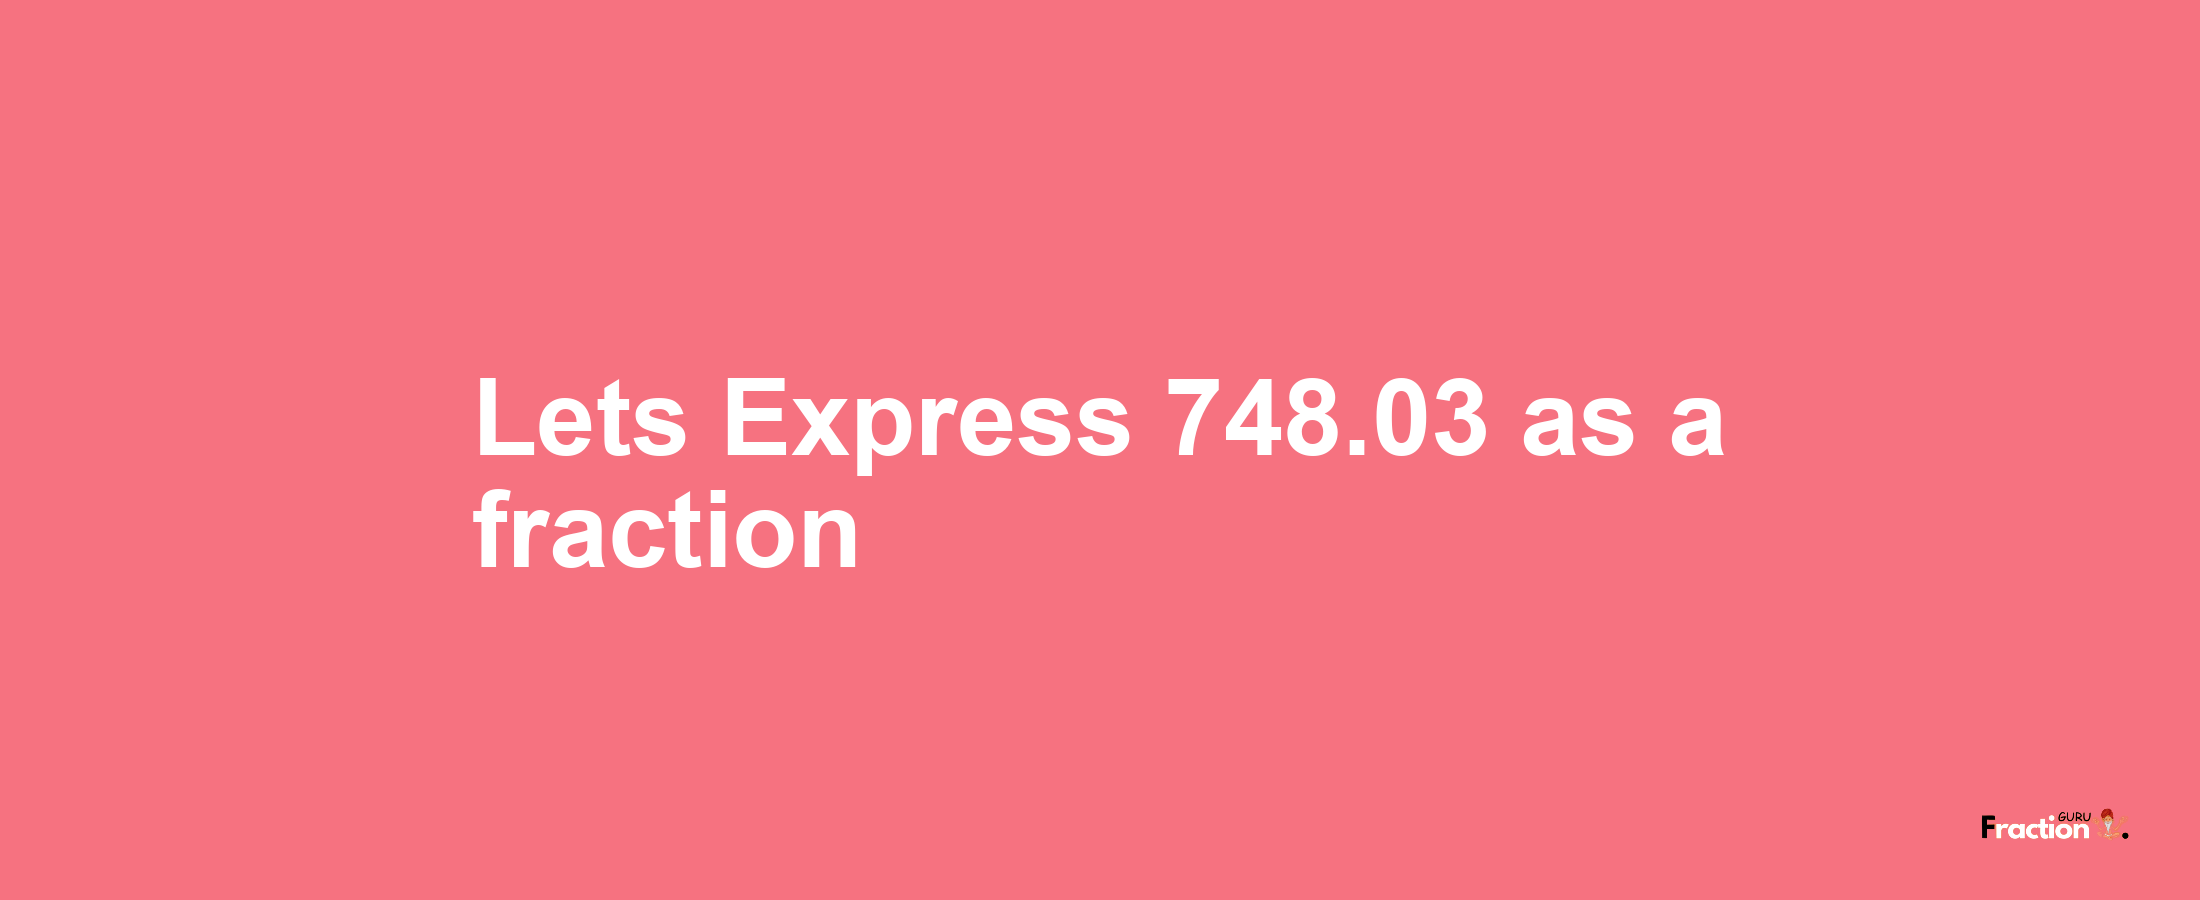 Lets Express 748.03 as afraction